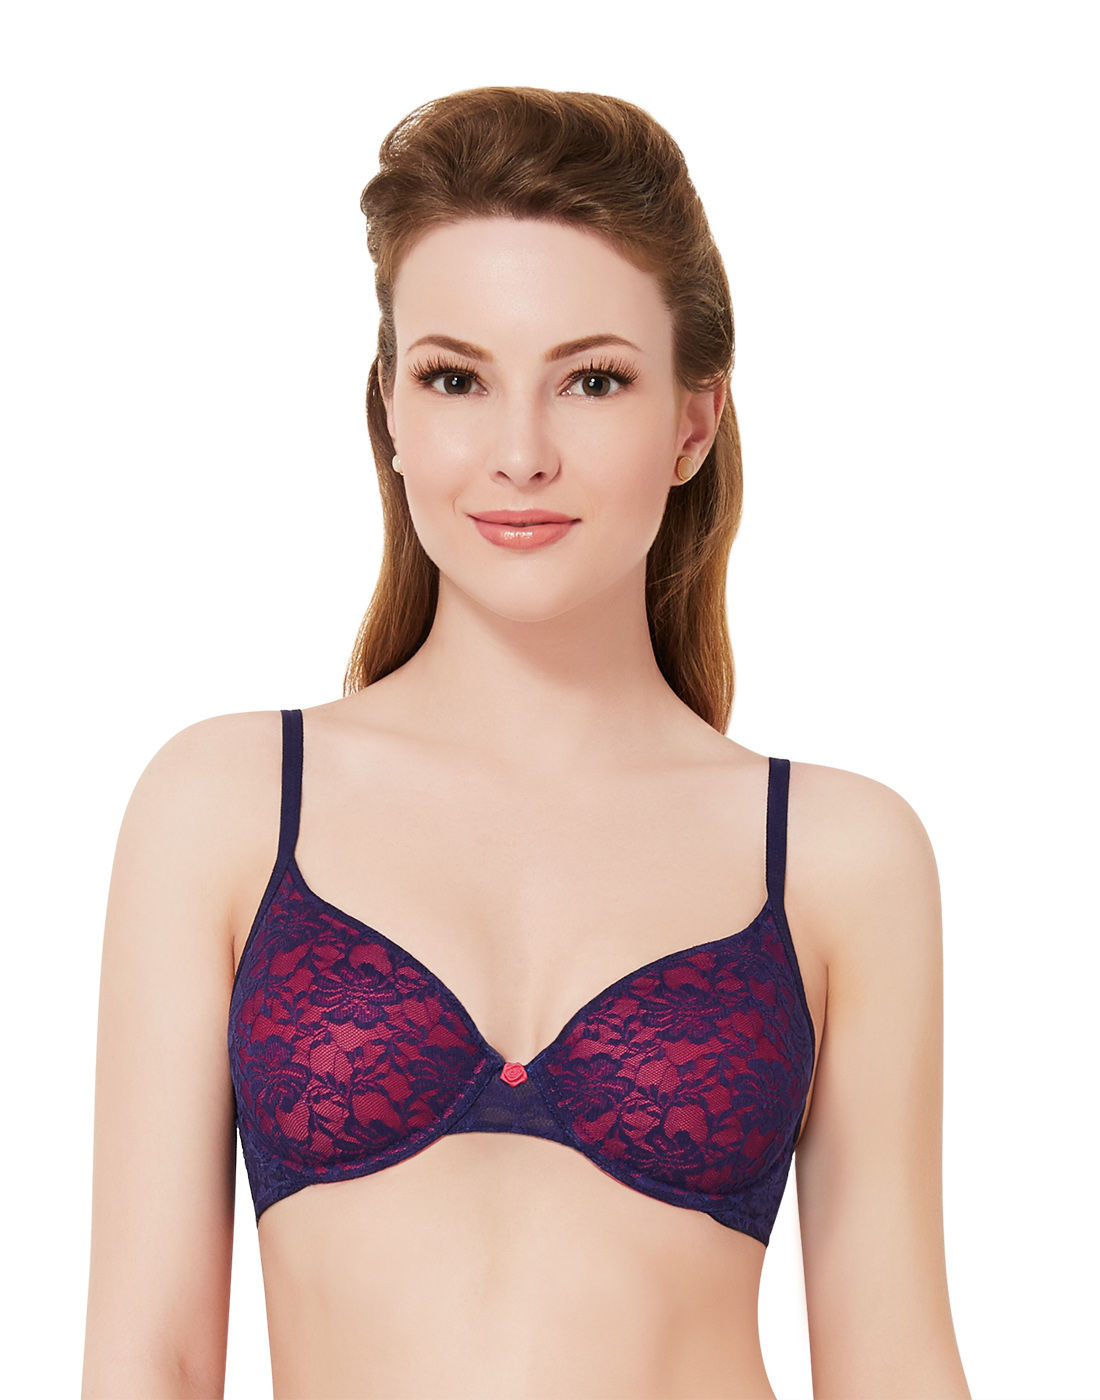 Amante Floral Romance Padded Wired Neon Pink and Blue T-Shirt Bra (32D)